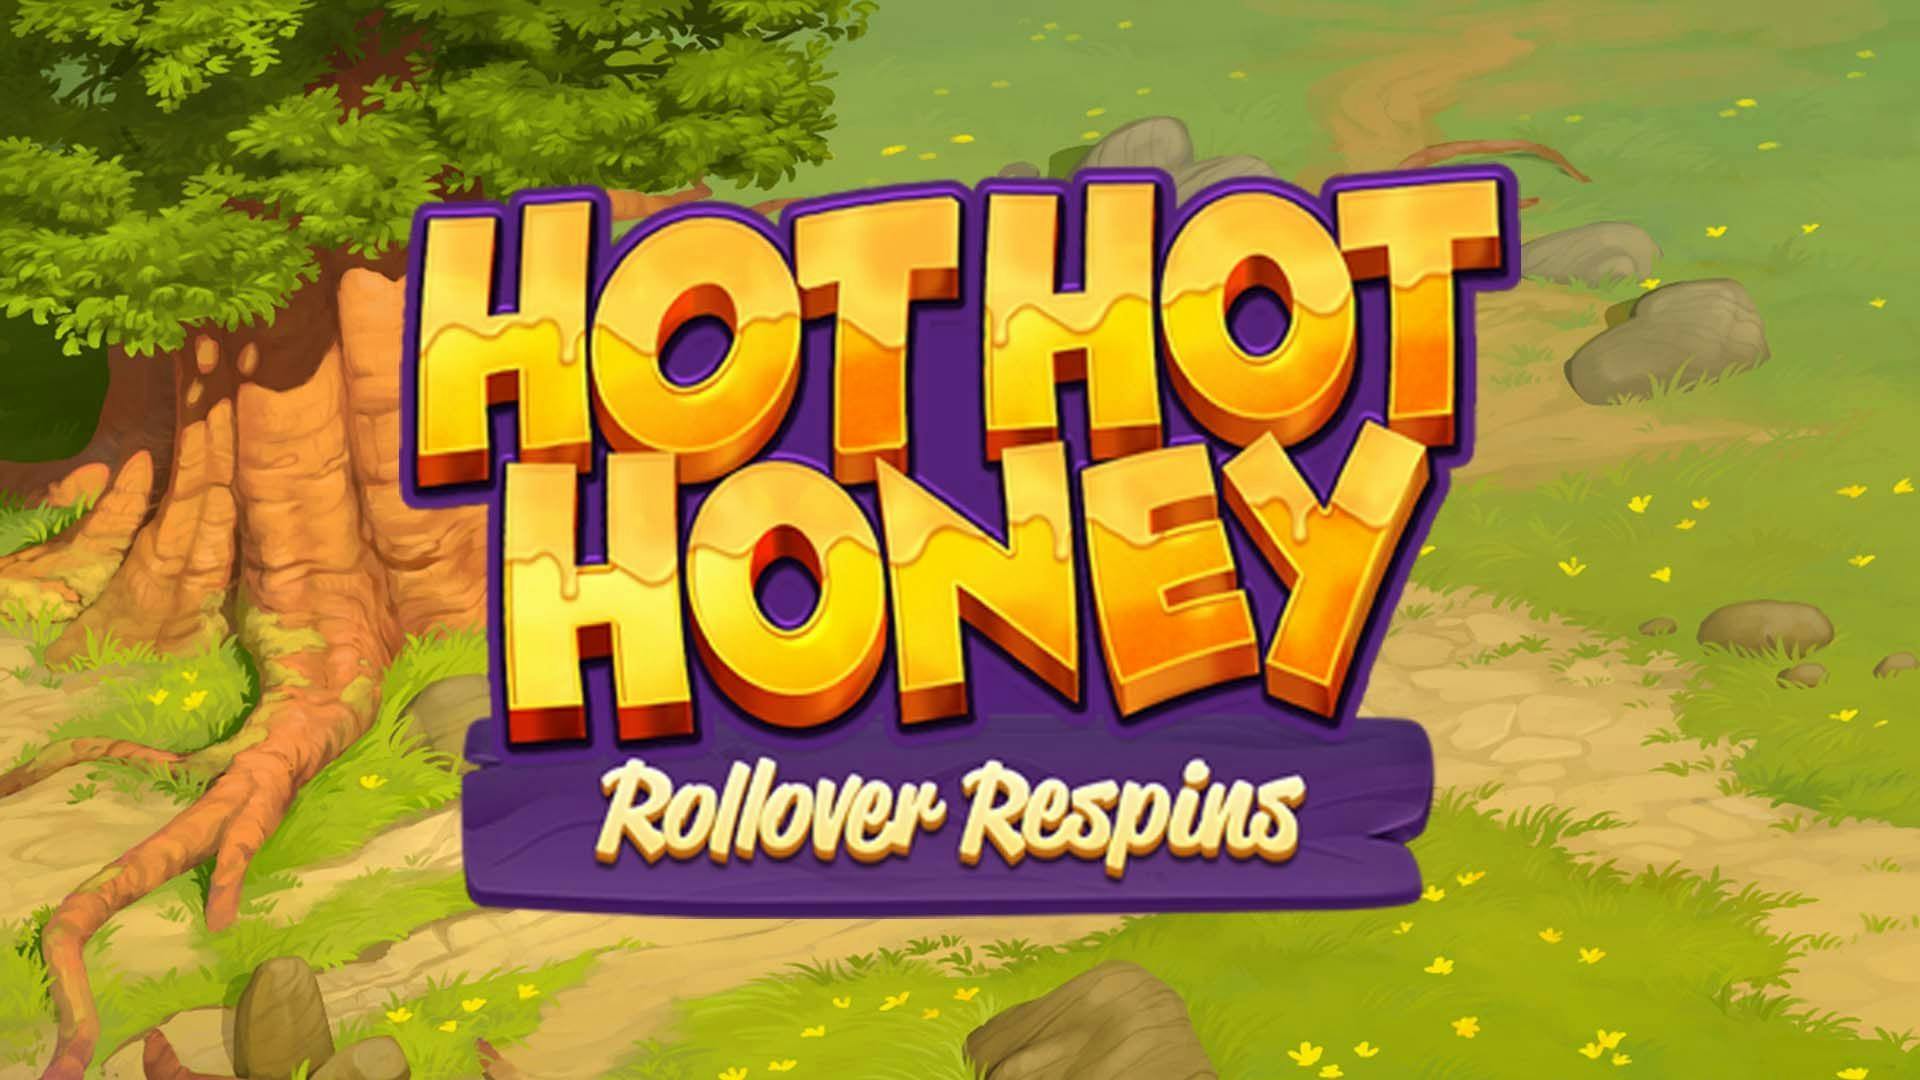 Hot Hot Honey Rollover Respins Slot Machine Online Free Game Play